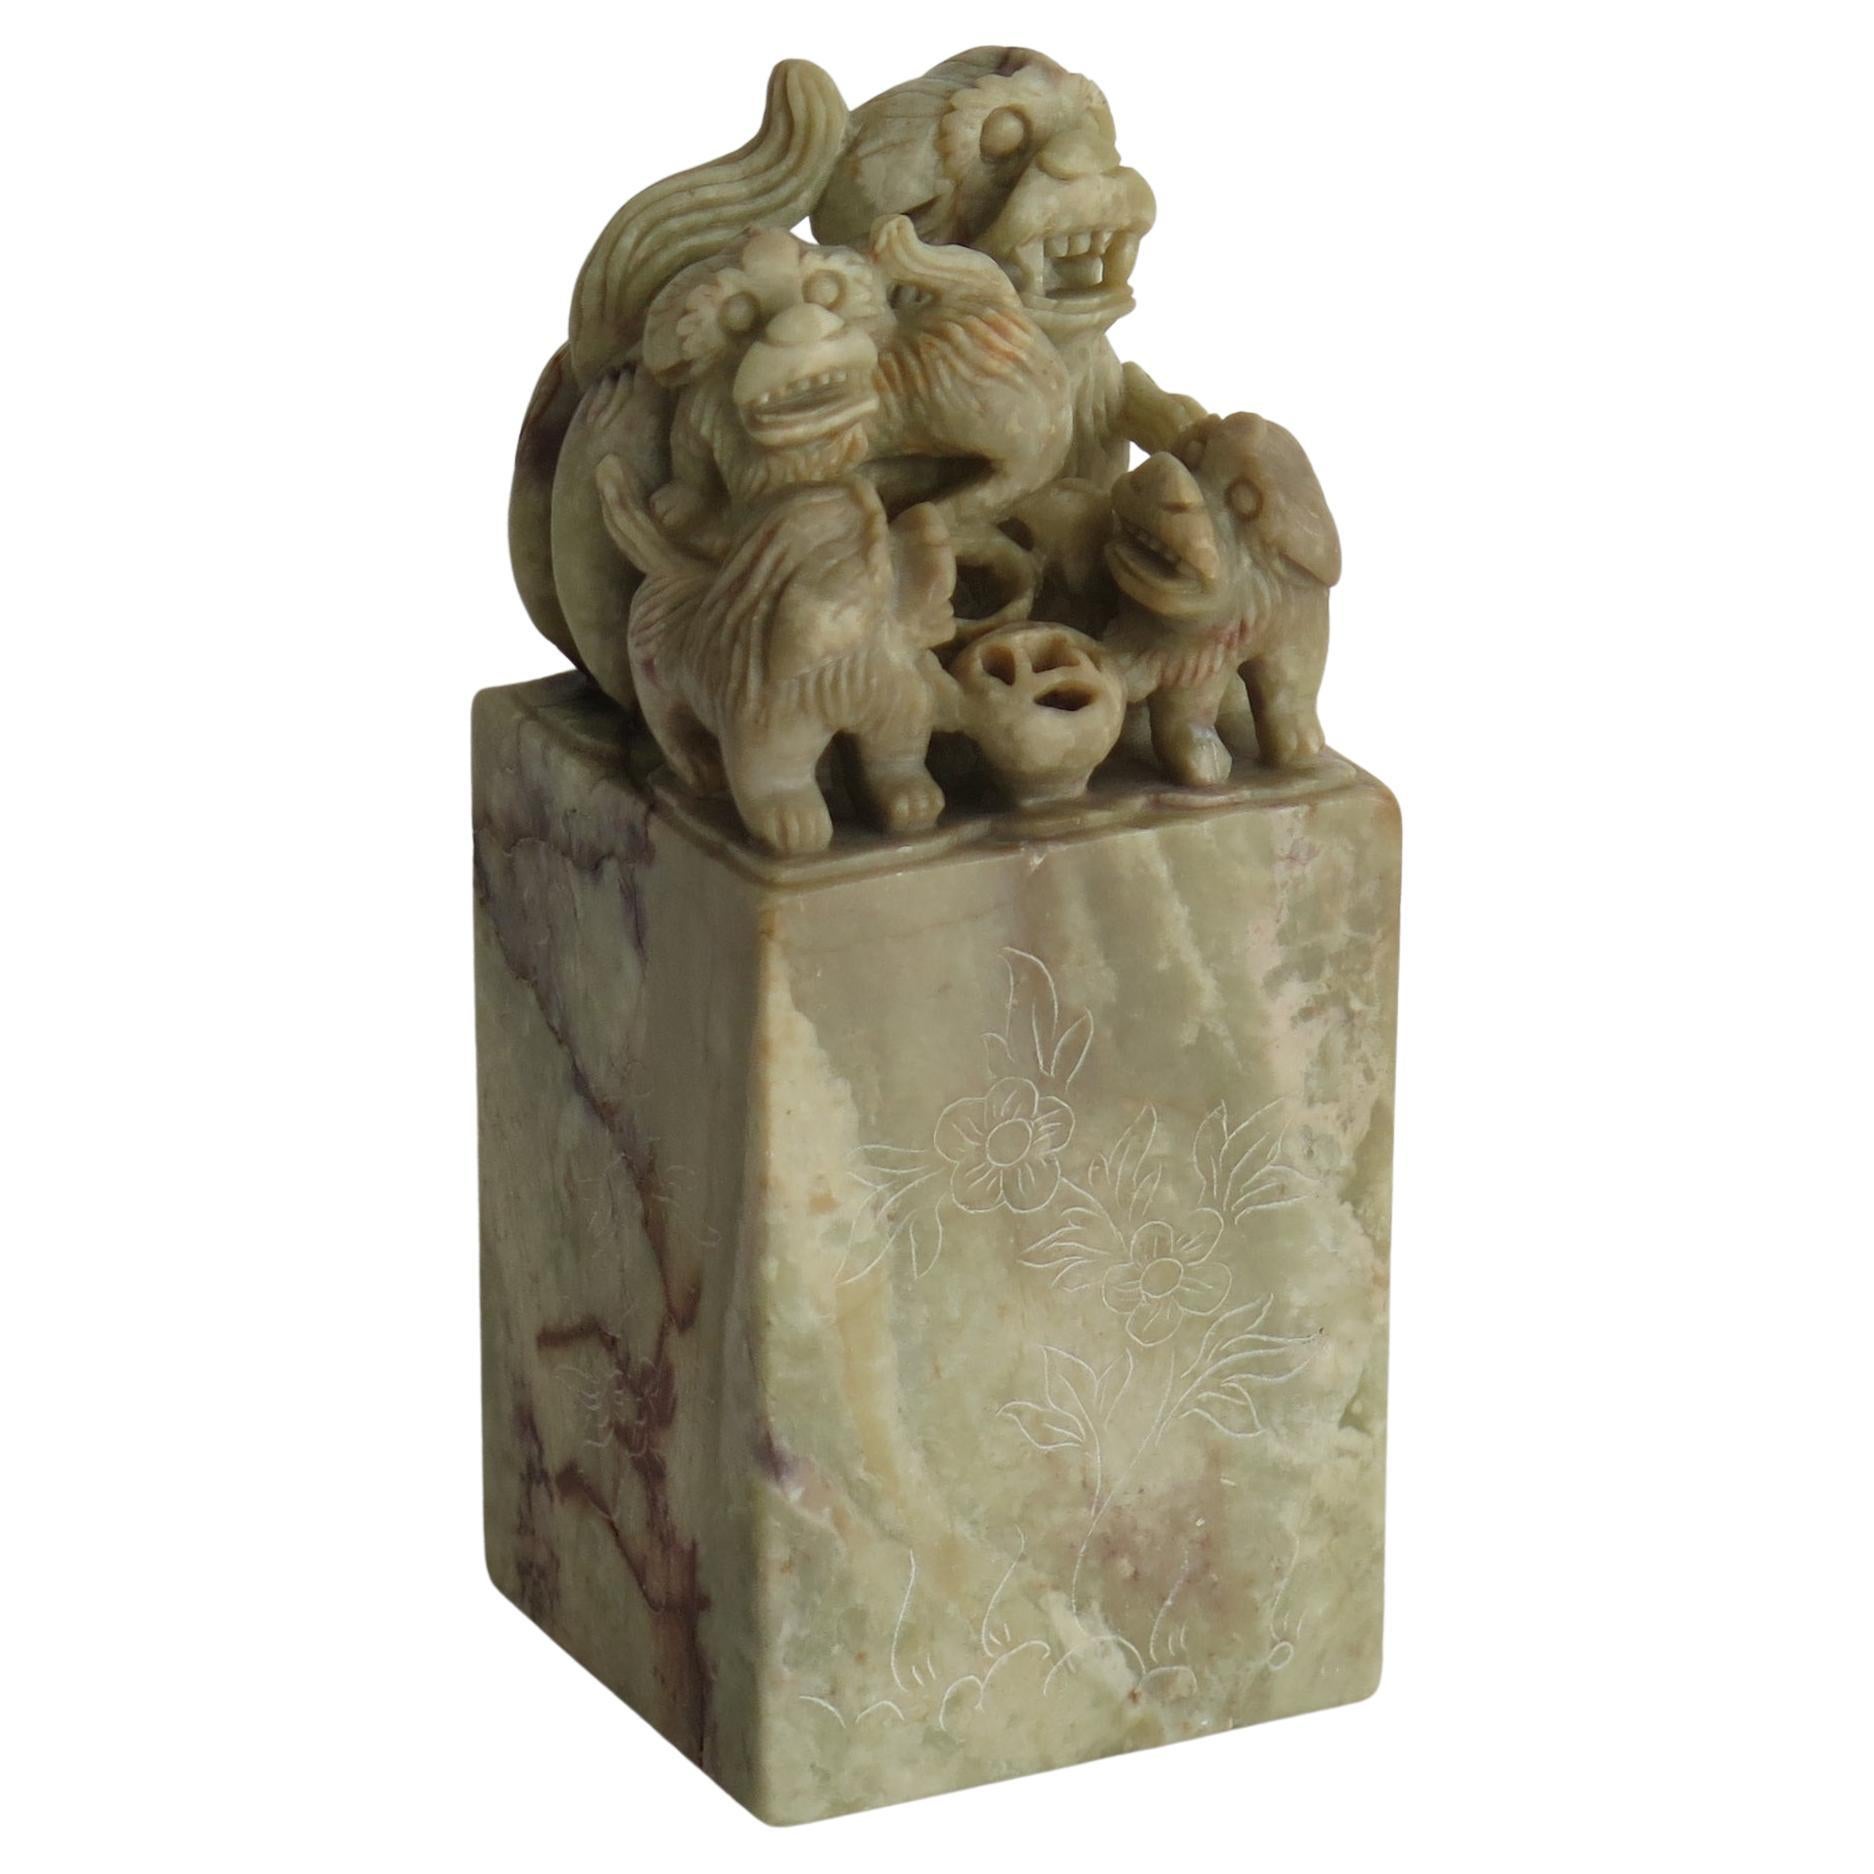 How To Date Chinese Soapstone Carvings